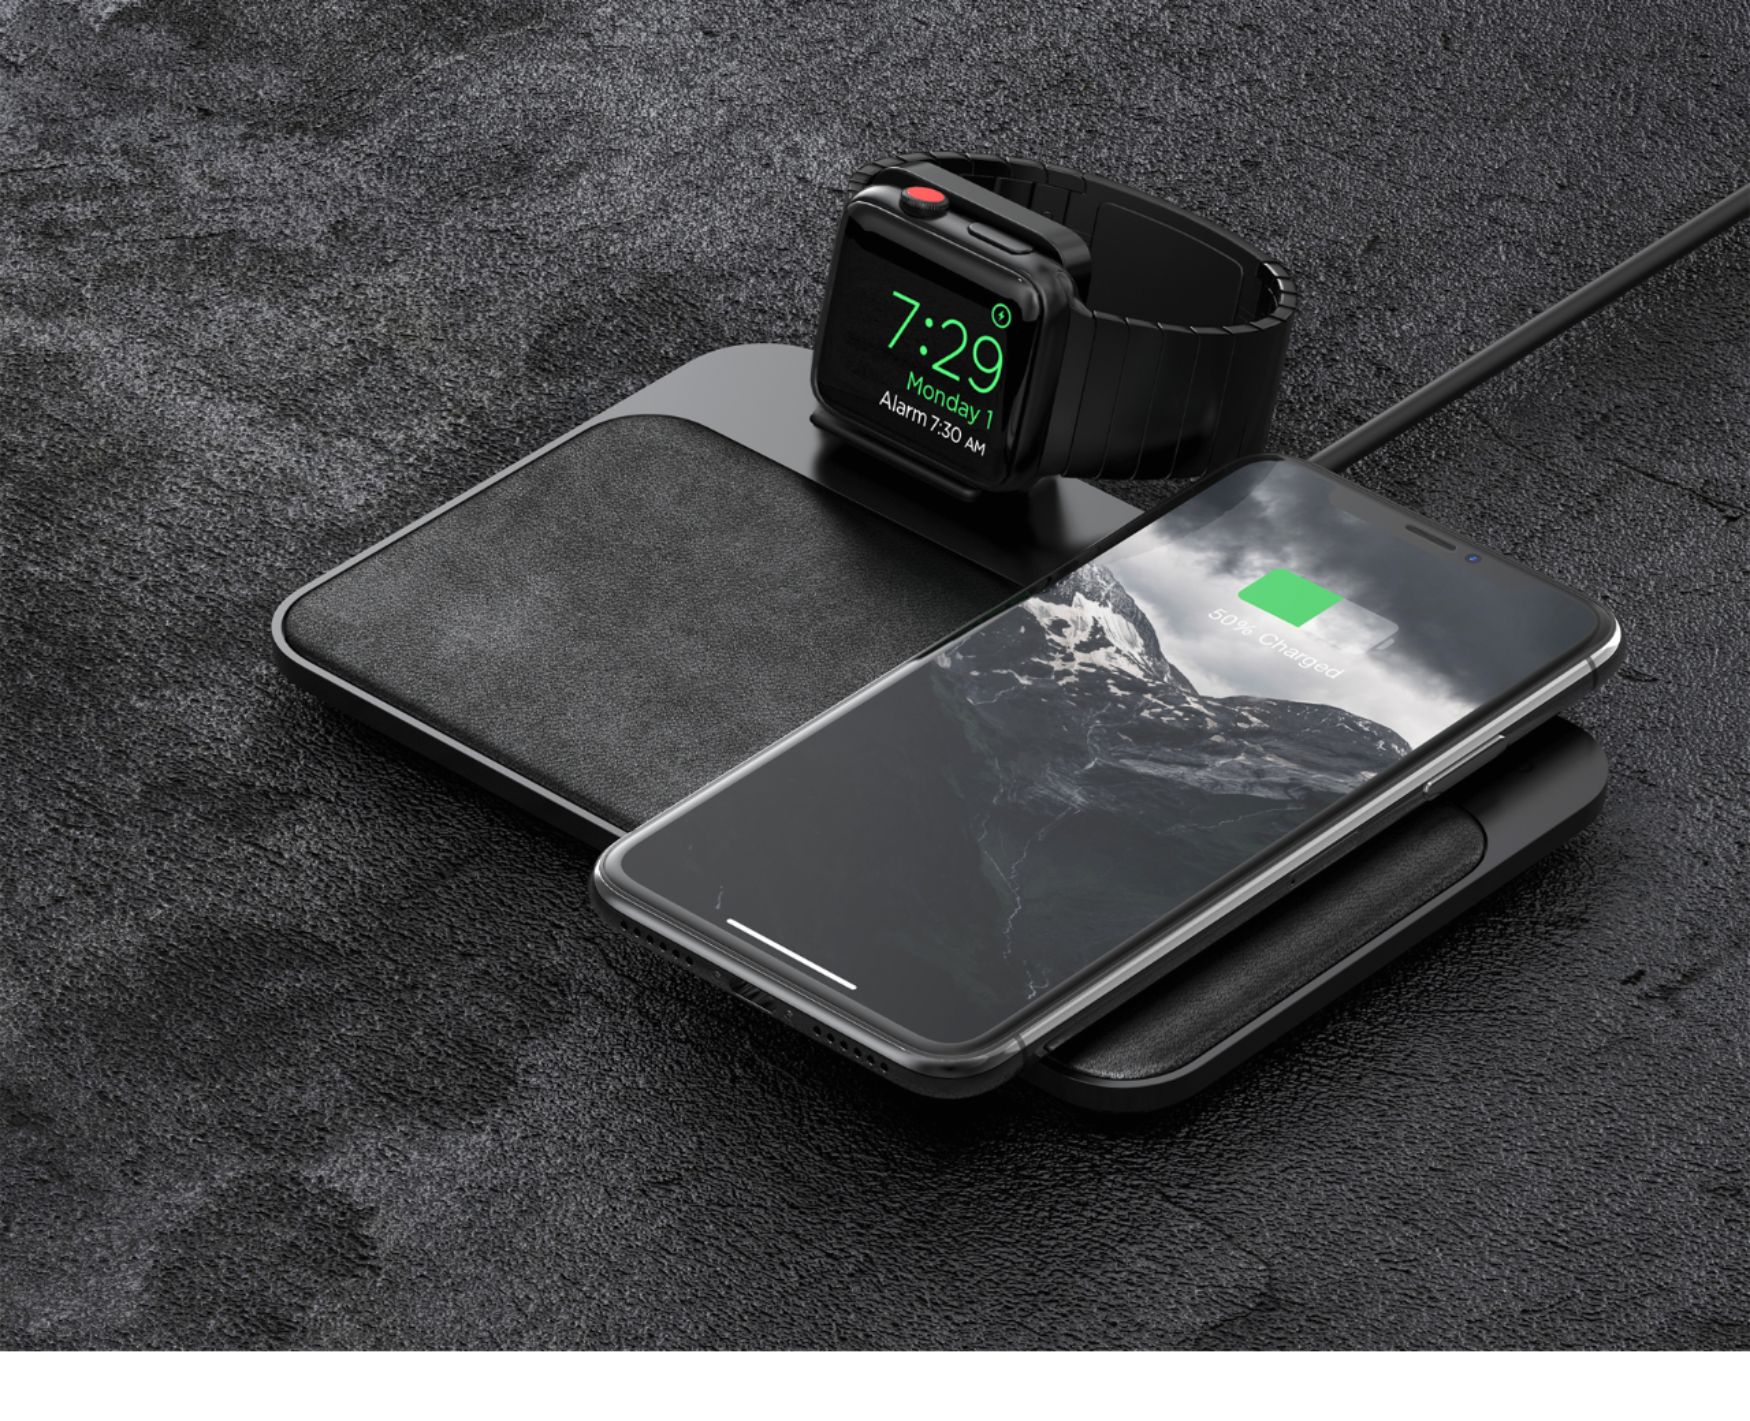 Nomad Wireless Charging Pad For Iphone And Apple Watch Black Nm3w240k00 Best Buy,What Is The Best Color For A Diamond